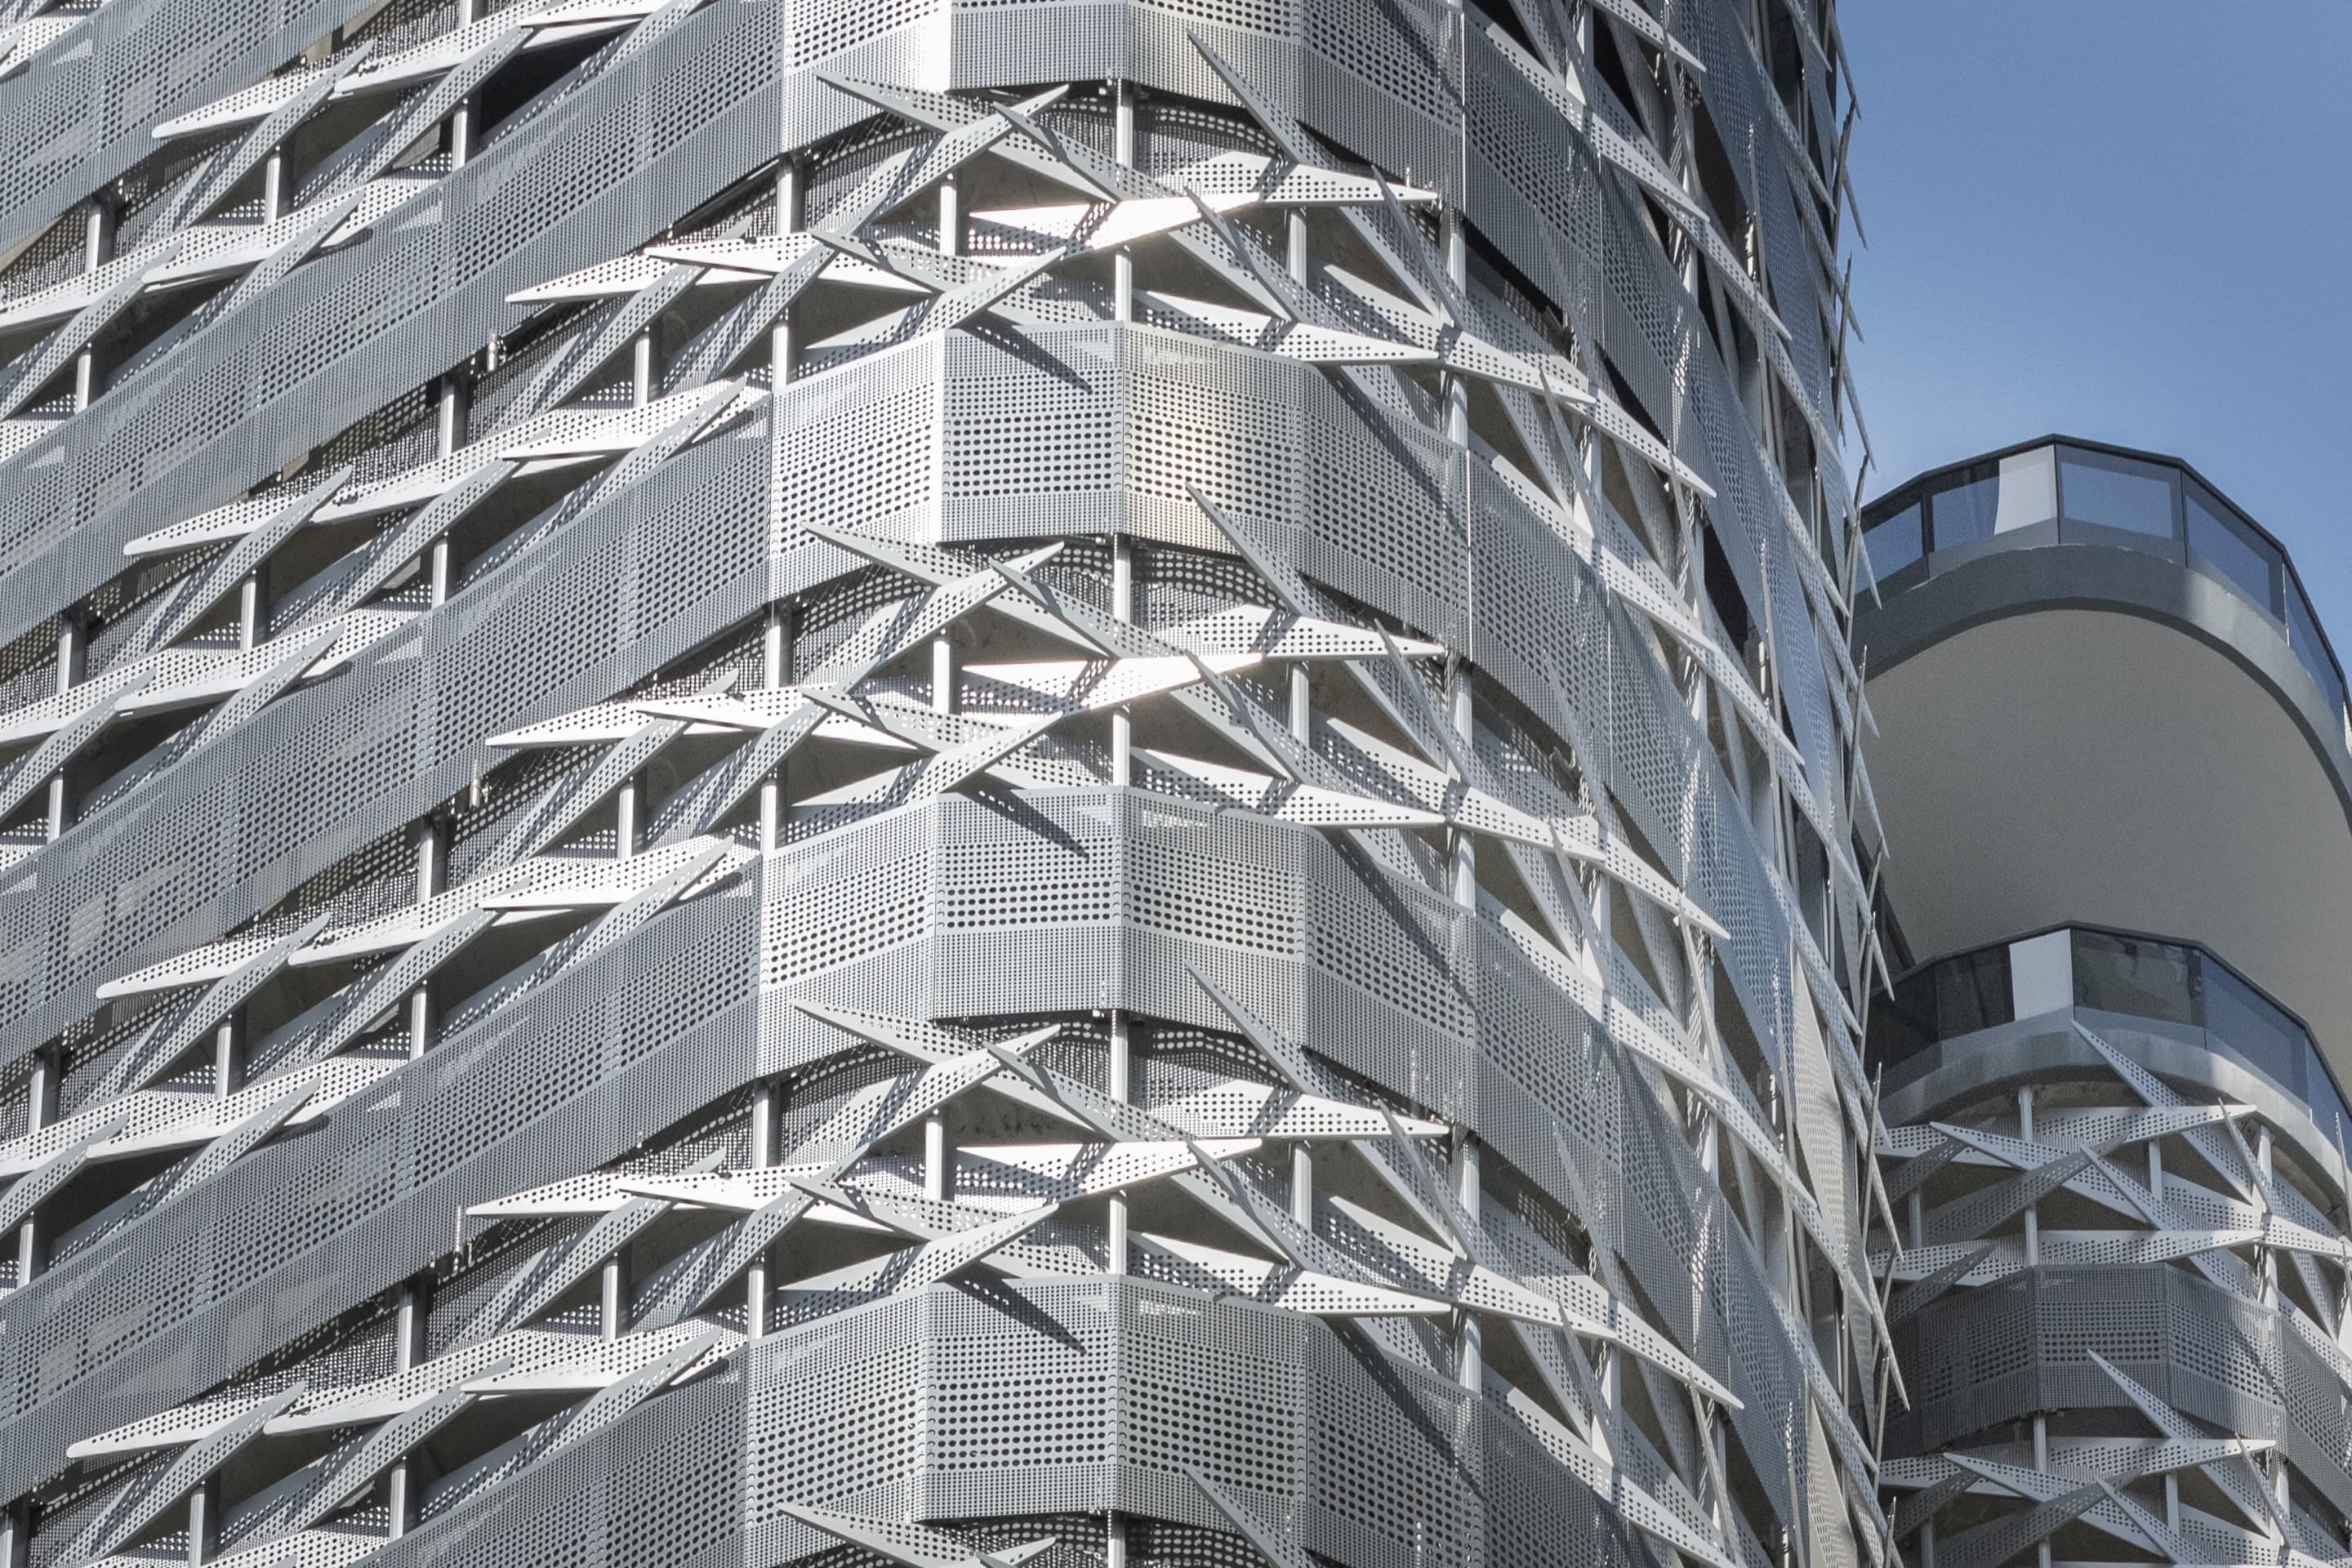 Custom perforated-metal facade for Brickell Flatiron in Miami, produced by Zahner.